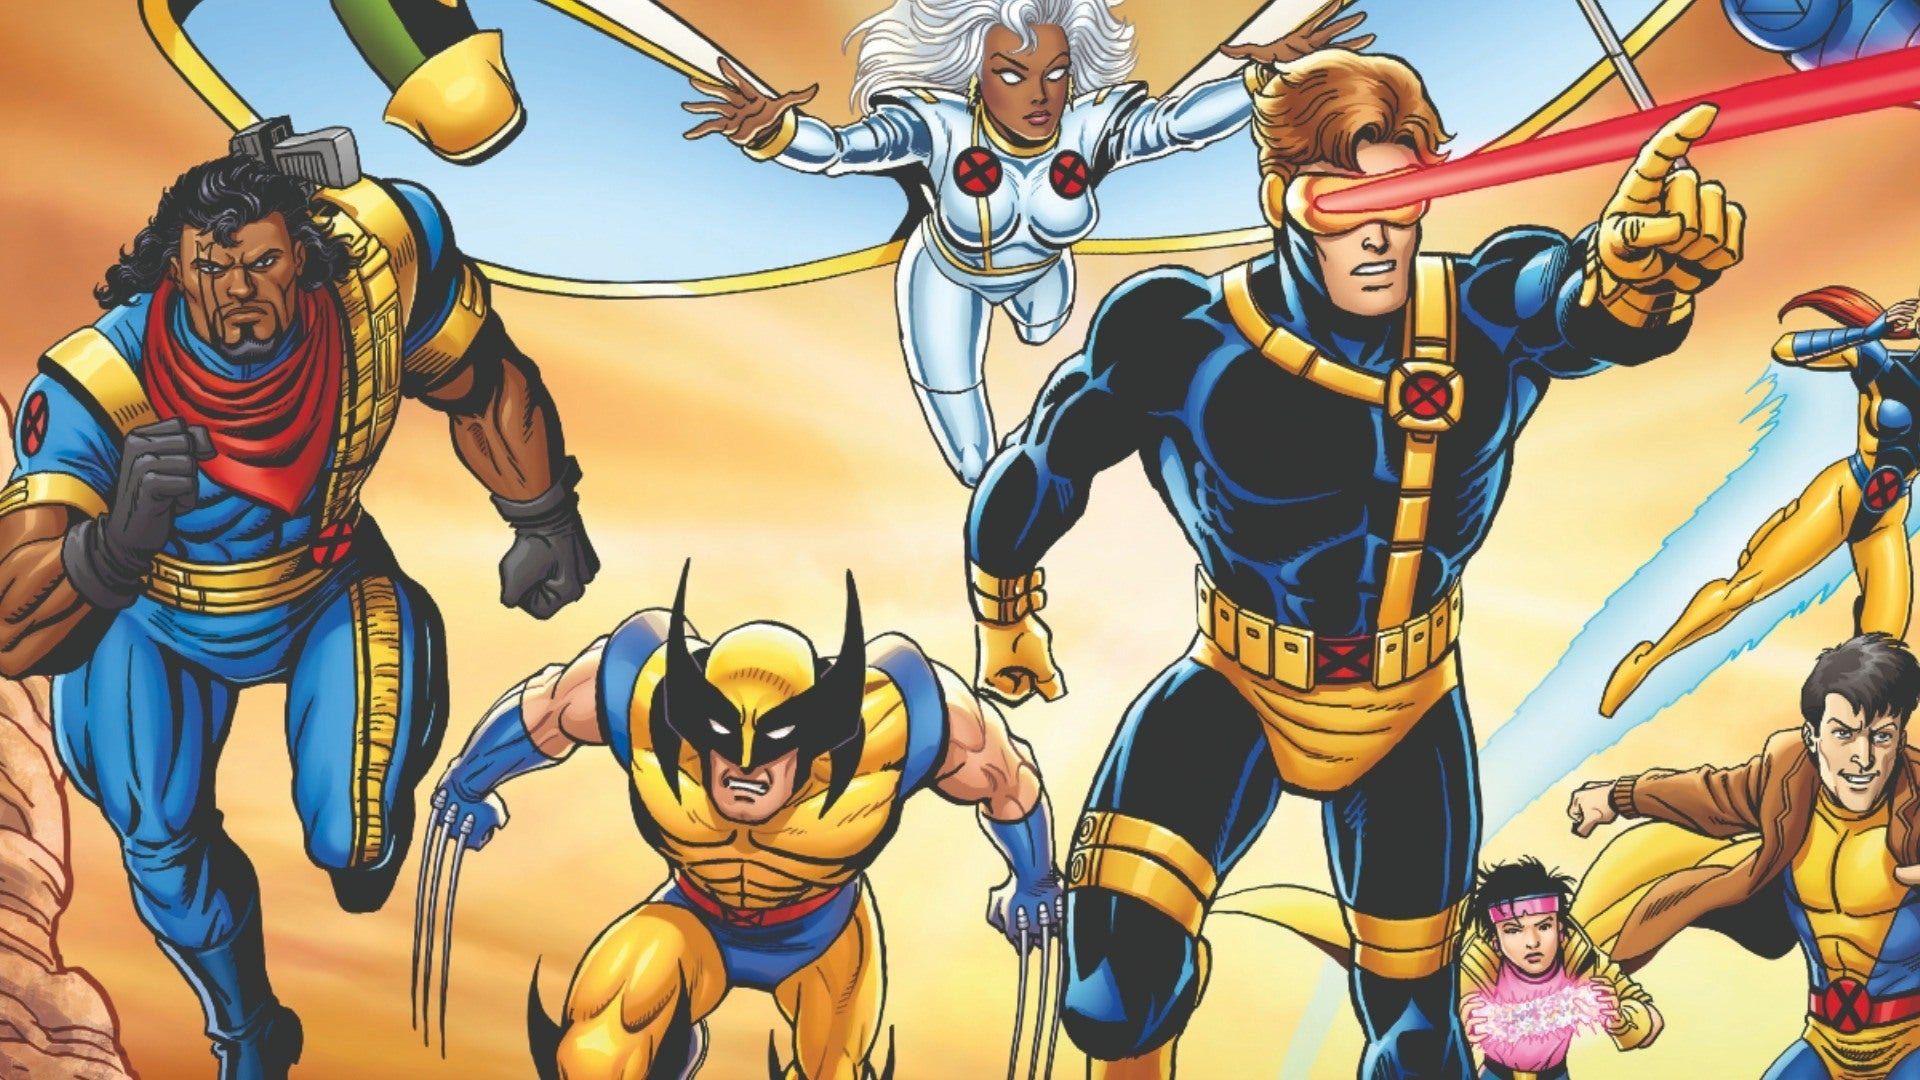 X-Men Animated Series Getting A Reboot From Marvel